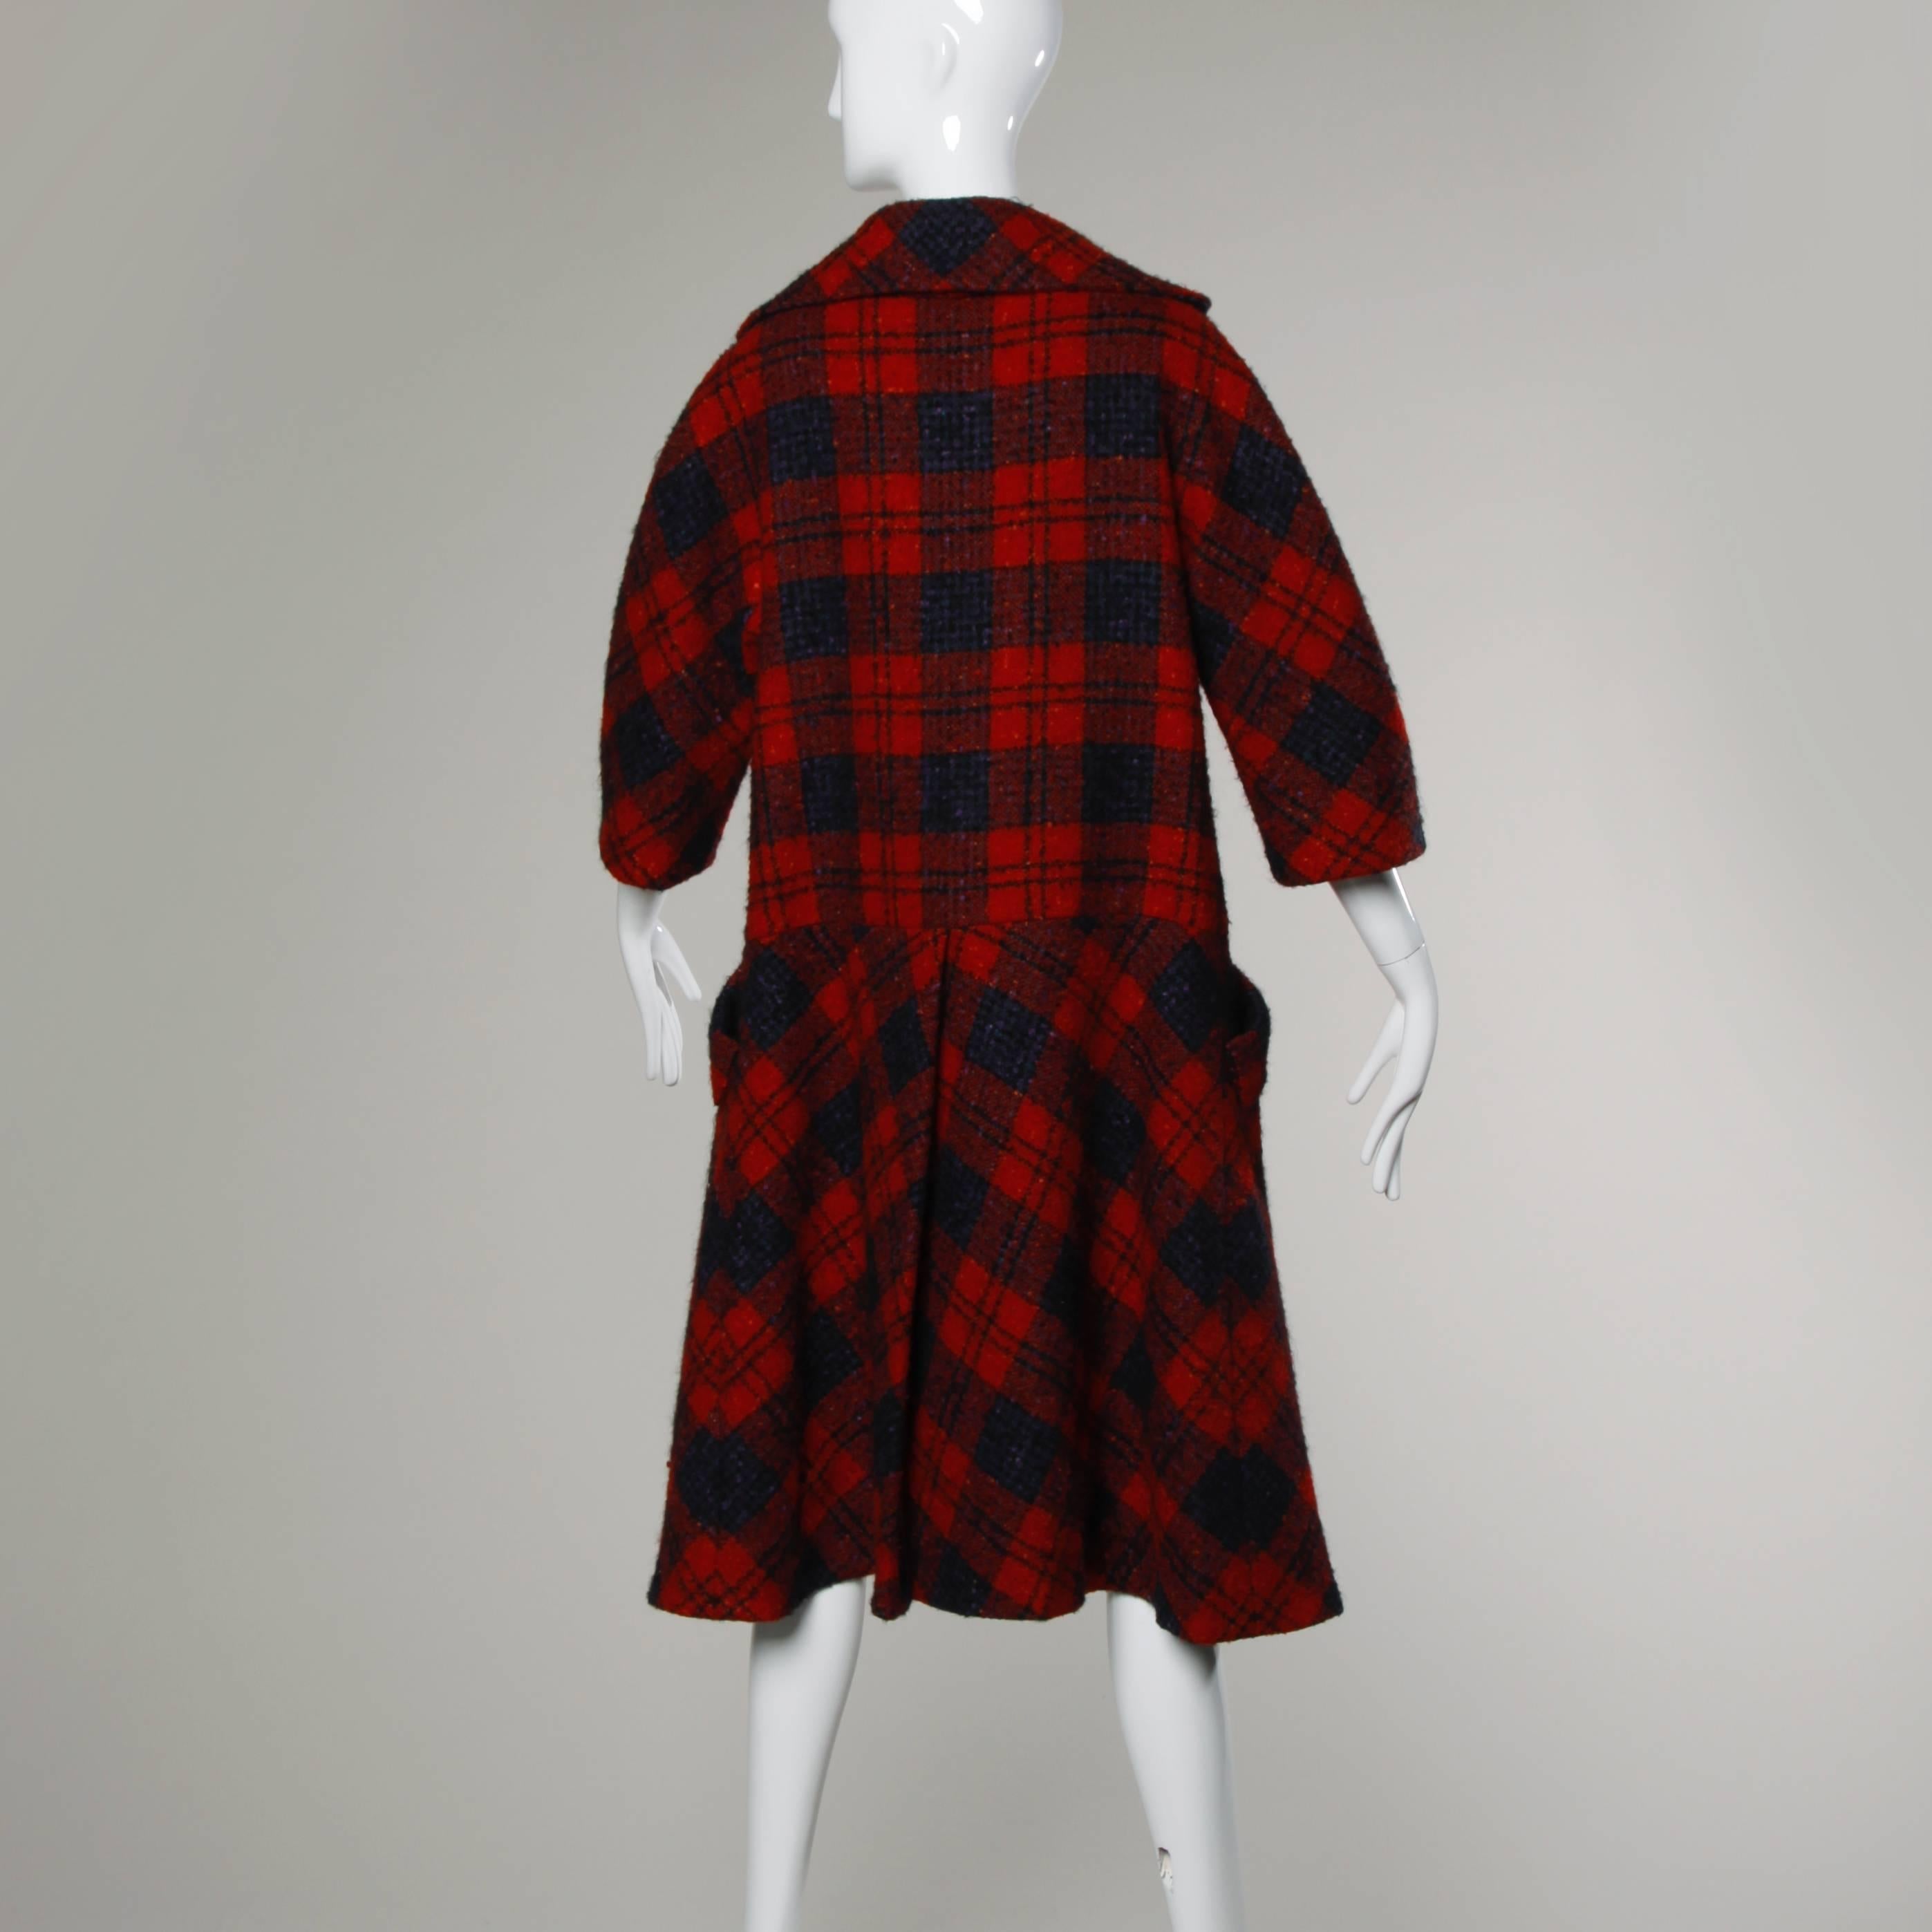 Gorgeous vintage Sarmi for I. Magnin red plaid coat with a drop waist, 3/4 length sleeves and a matching sash belt. Beautifully constructed with couture hand stitched detailing throughout the coat.

Details:

Fully Lined
Front Pockets
Matching